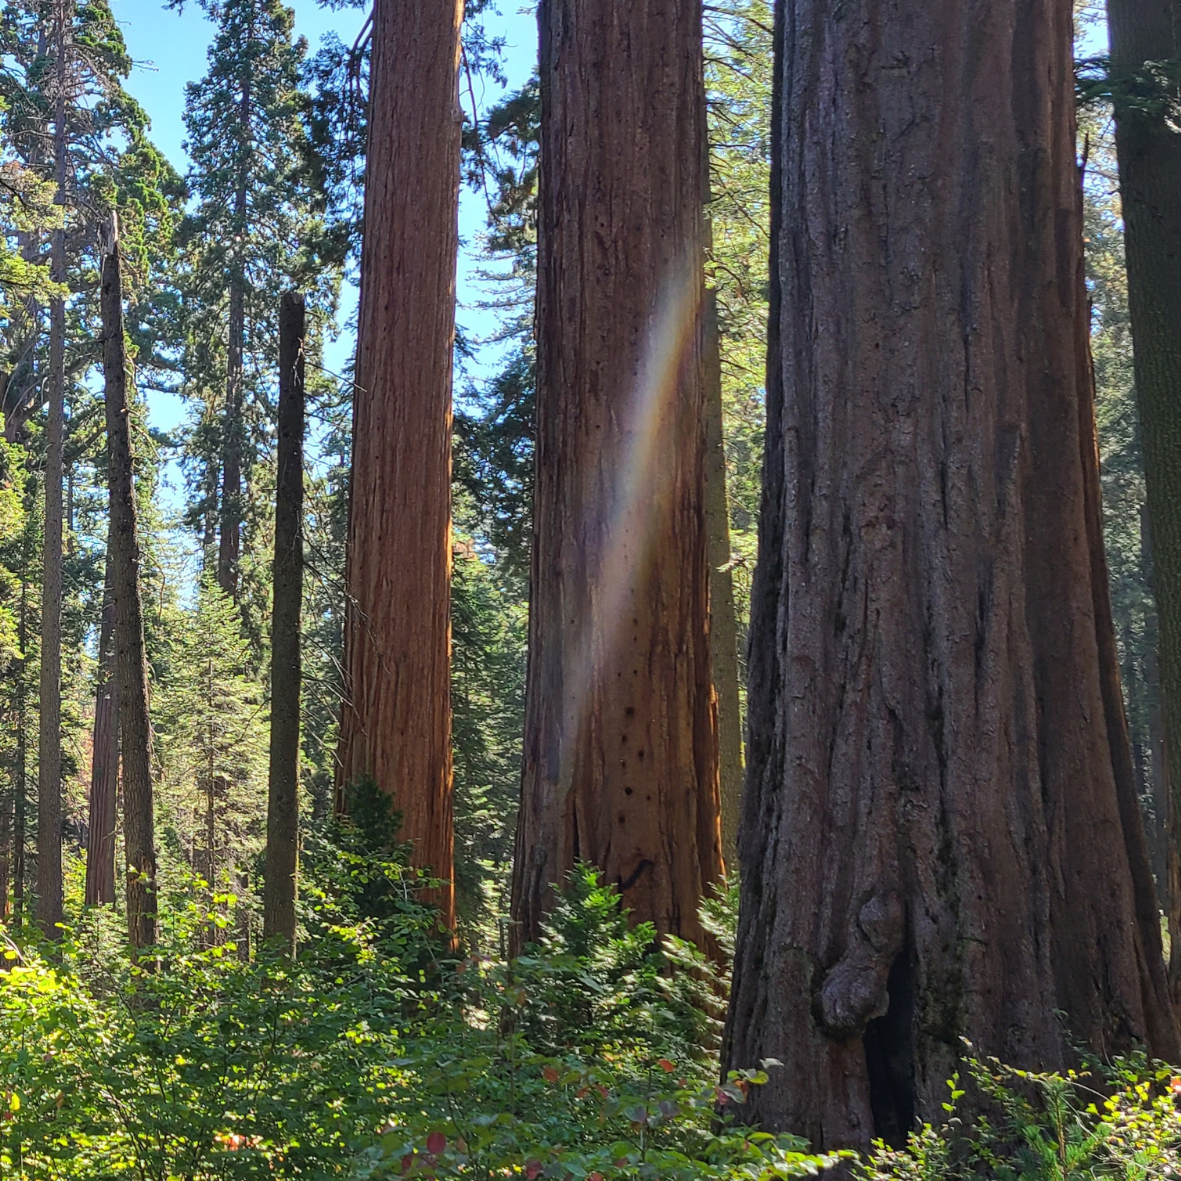 Giant sequoia trees in the forest